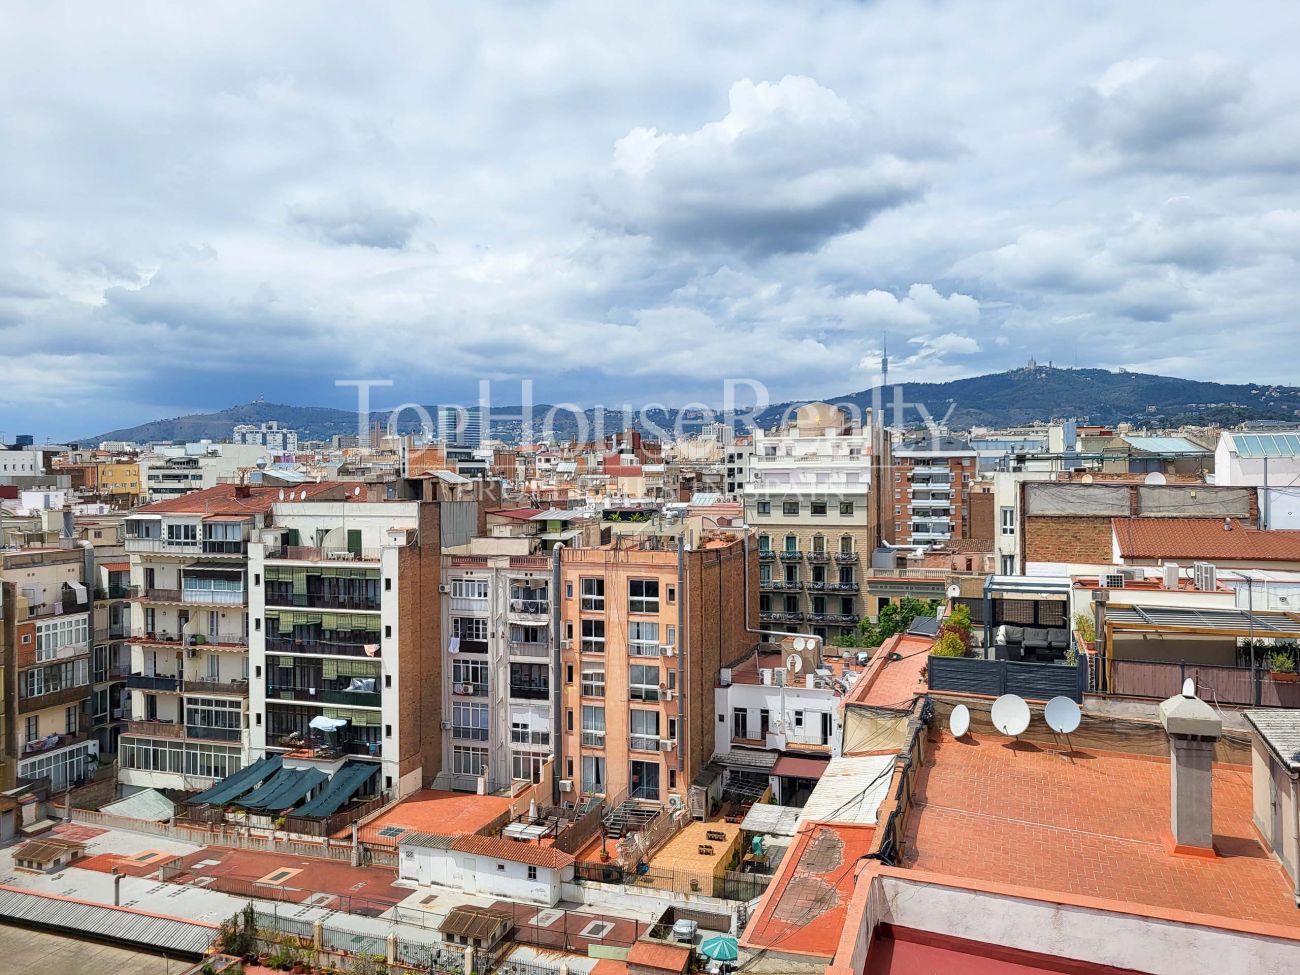 The apartment is located in the heart of Barcelona, in one of the most prestigious neighborhoods, L'Esquerra de l'Eixample